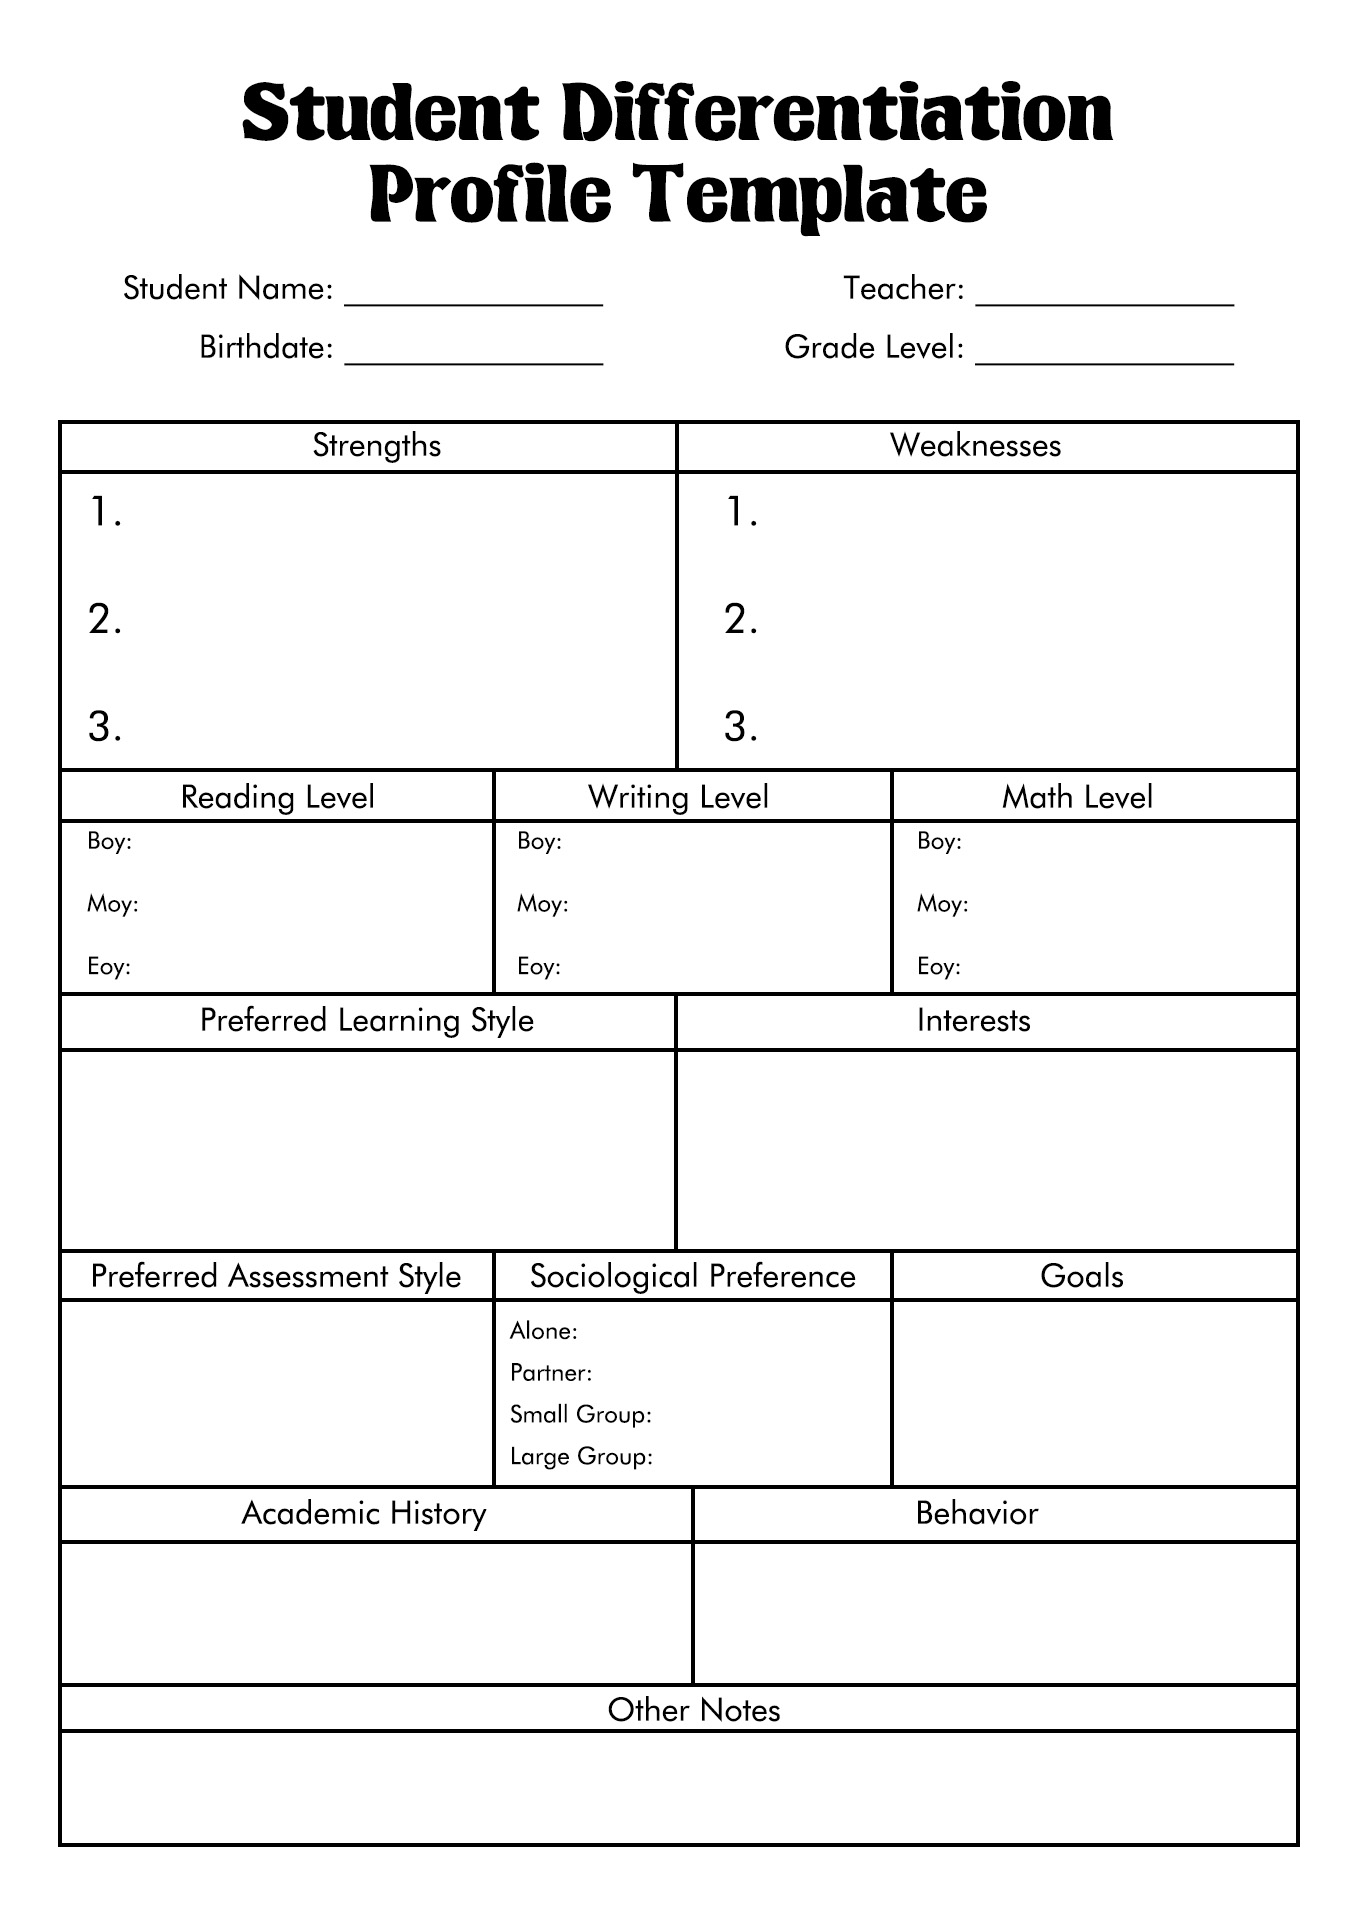 Student Learning Profile Templates